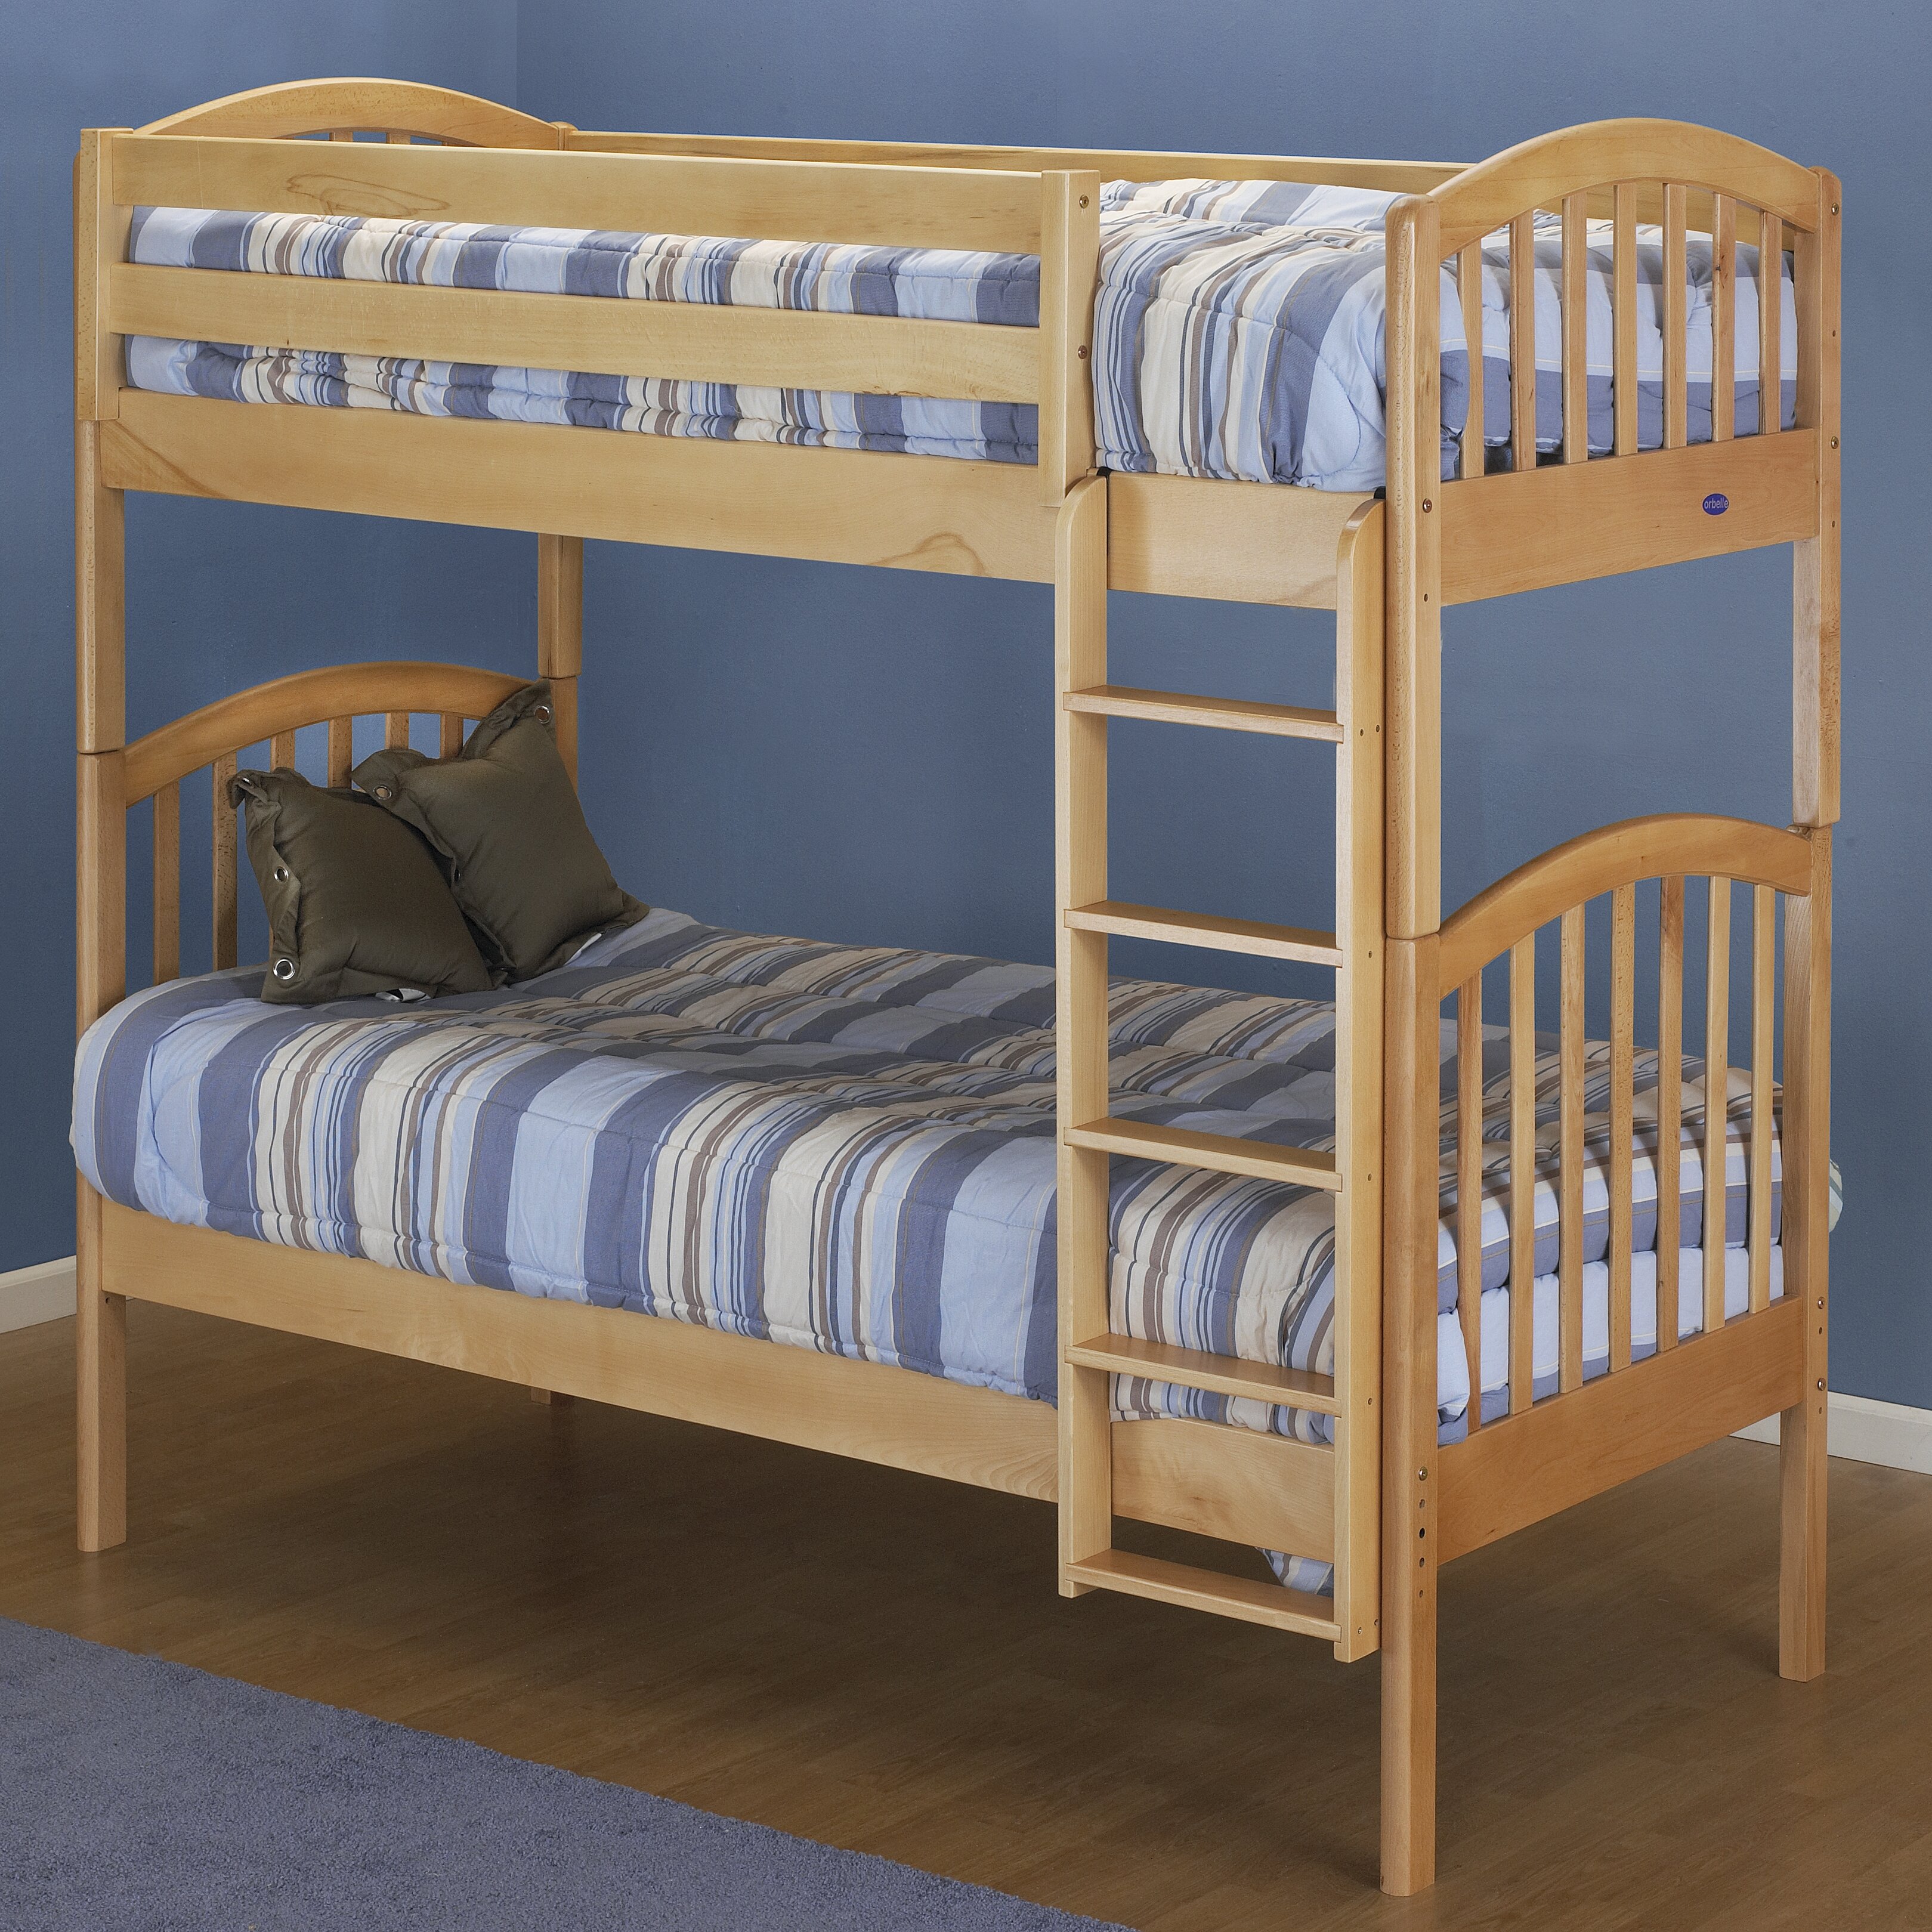 Room And Board Bunk Beds